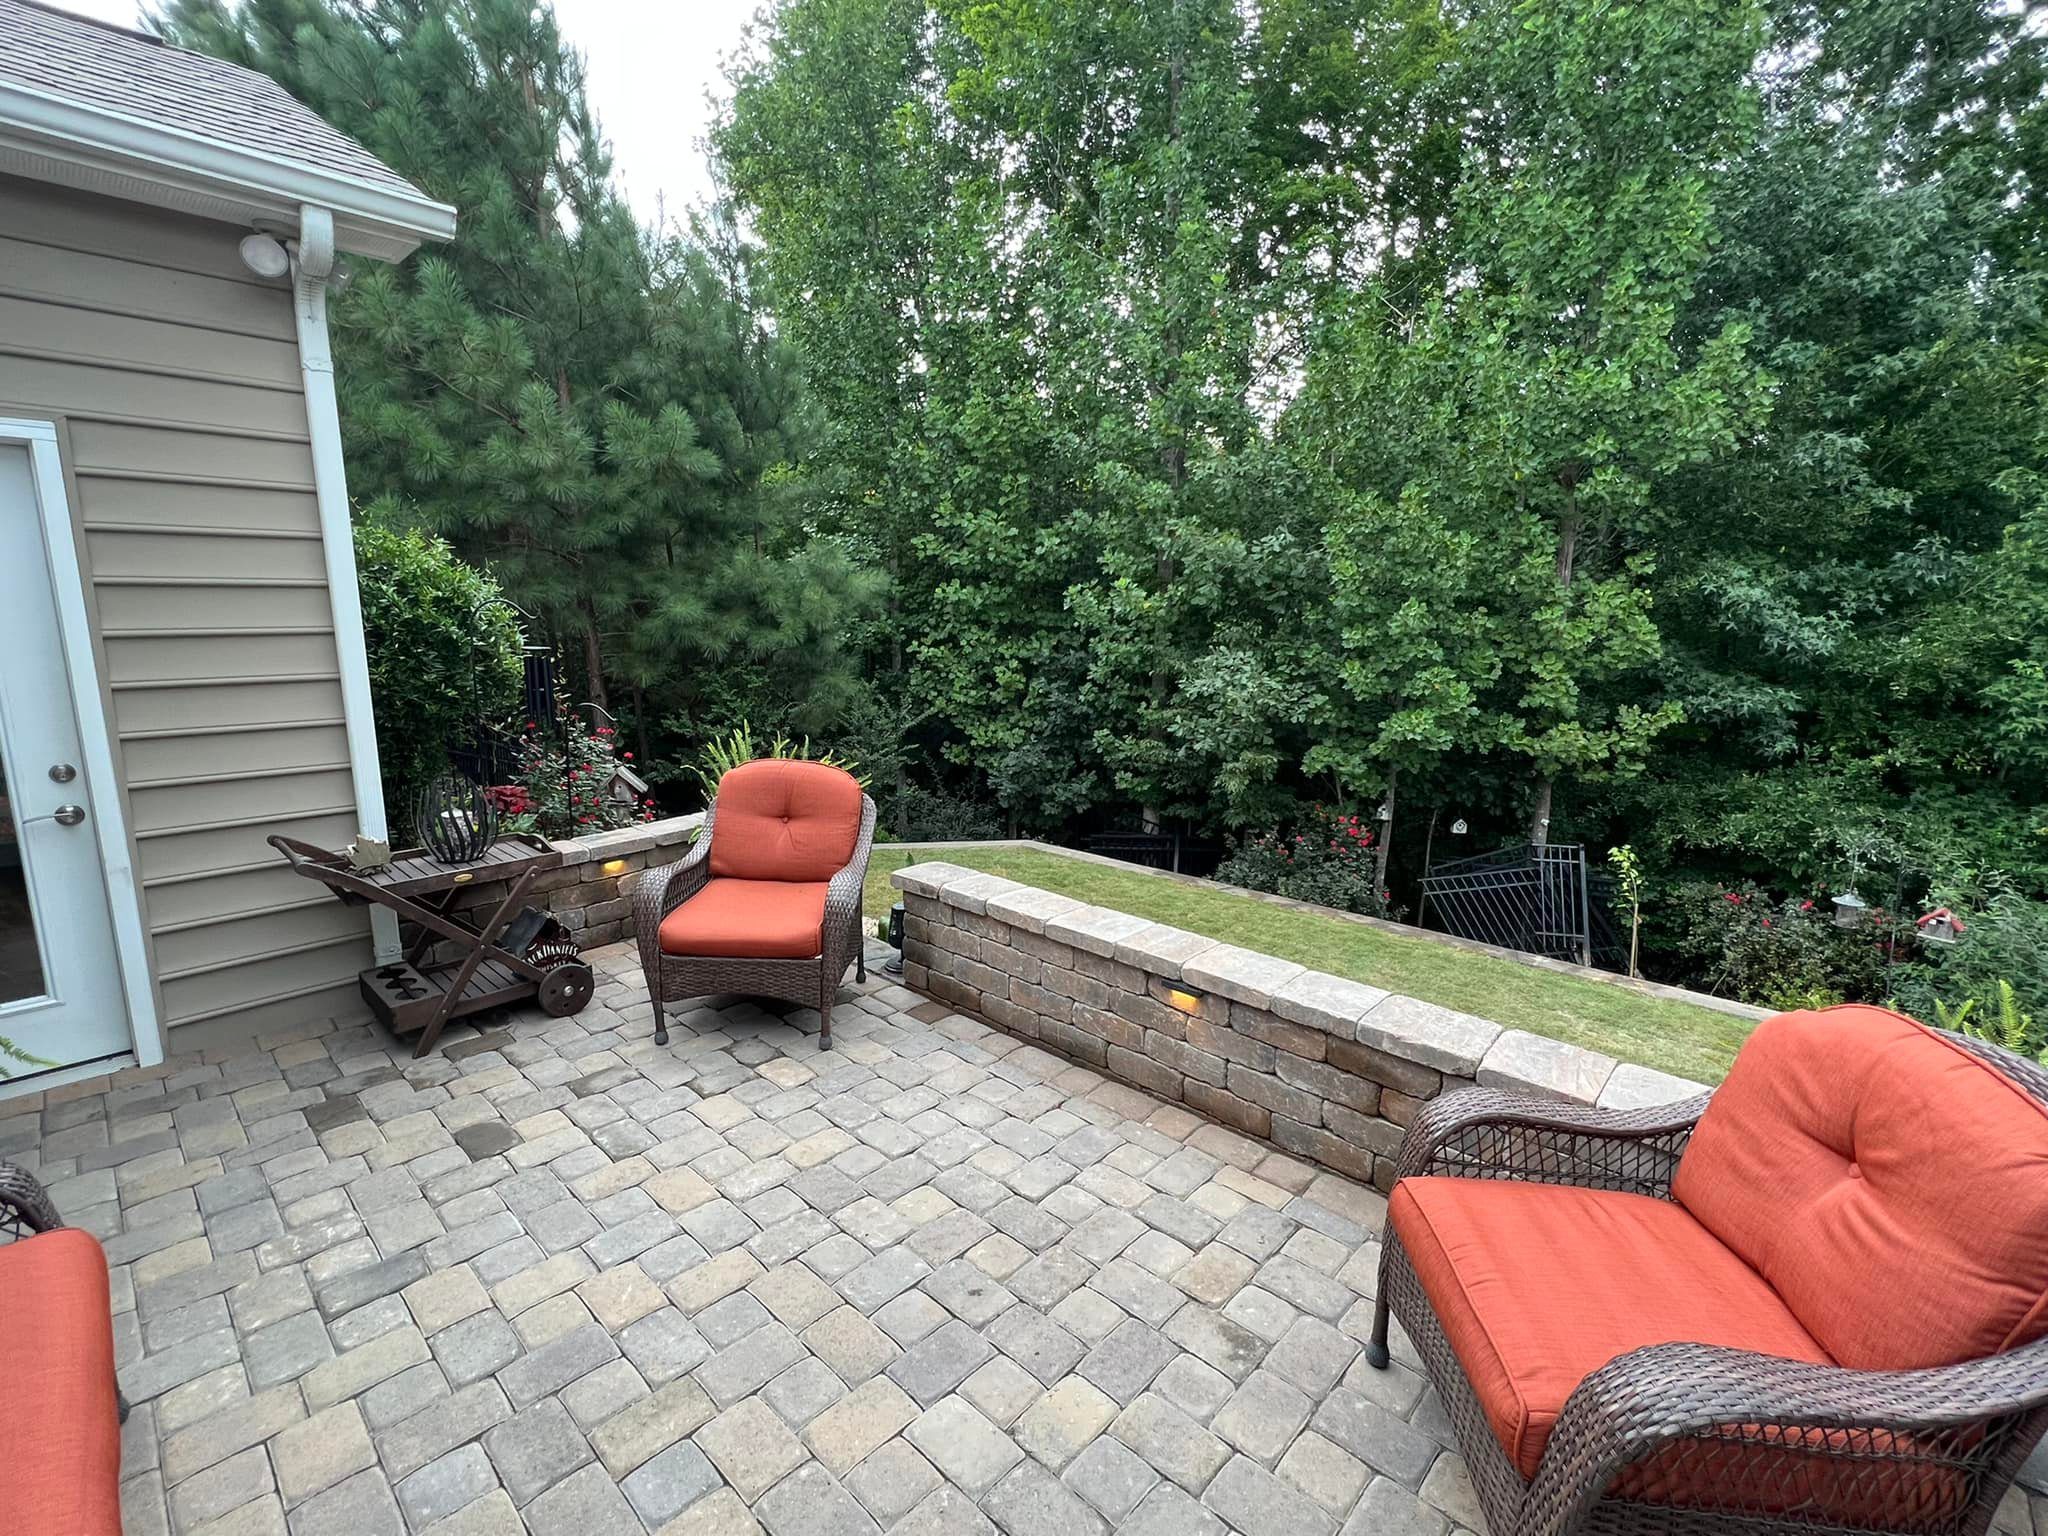 Fixing a Paver Patio – Outdoor Living Tip of the Day